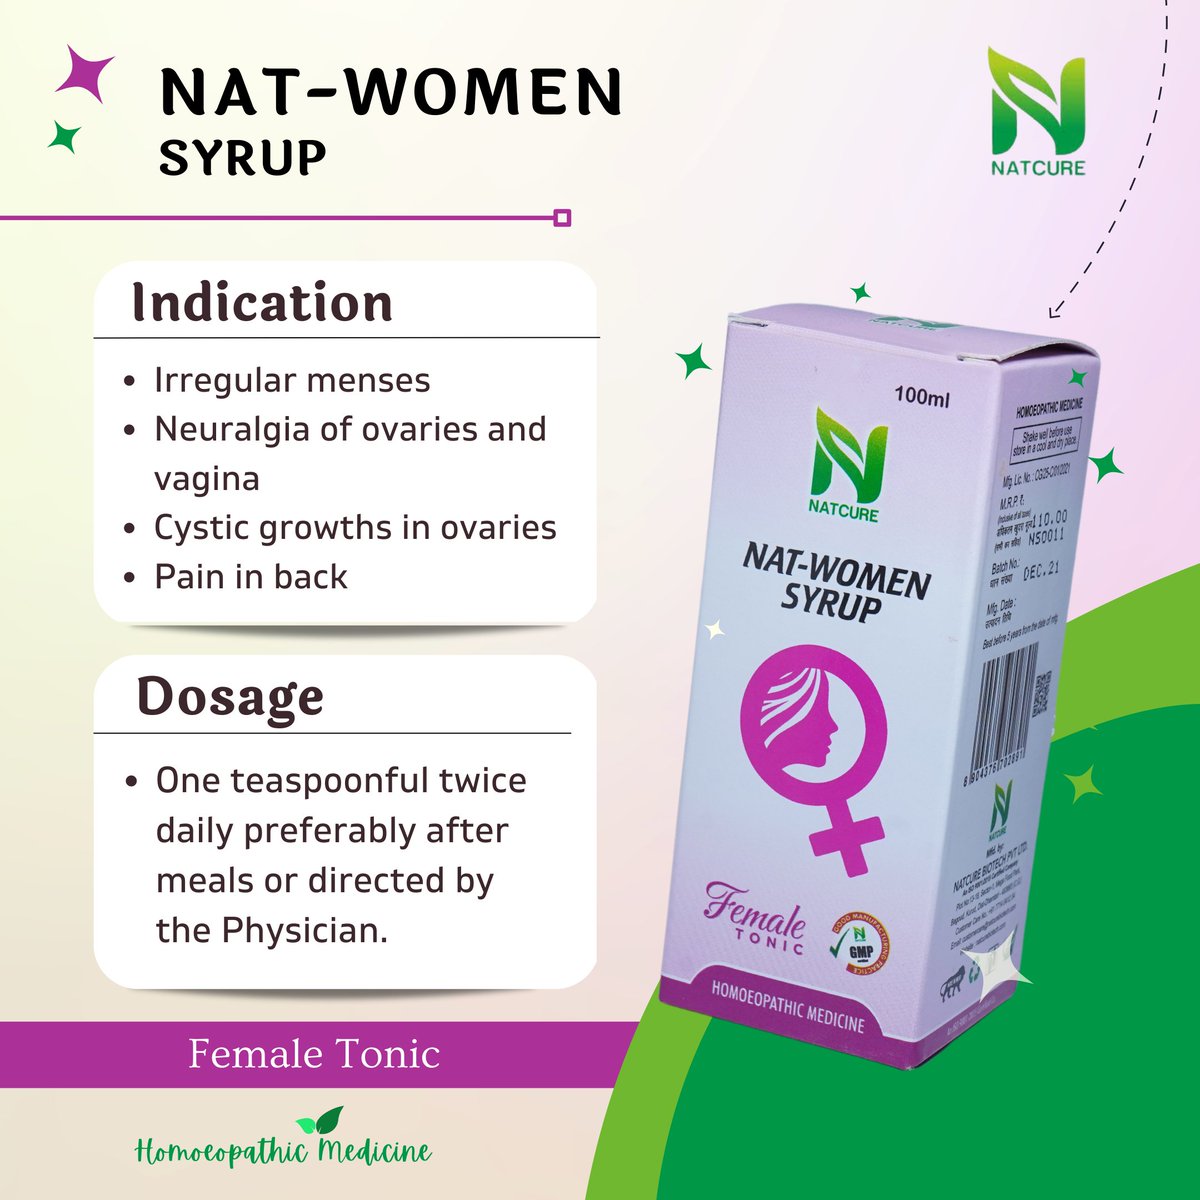 NAT - WOMEN

Indication

. Irregular menses
. Neuralgia of ovaries and vagina
. Cystic growths in ovaries
. Pain in back

Dosage

. One teaspoonful twice daily preferably after meals or as directed by the physician.
.
#natcure #backpaininwomen #irregularperiods #irregularmenses